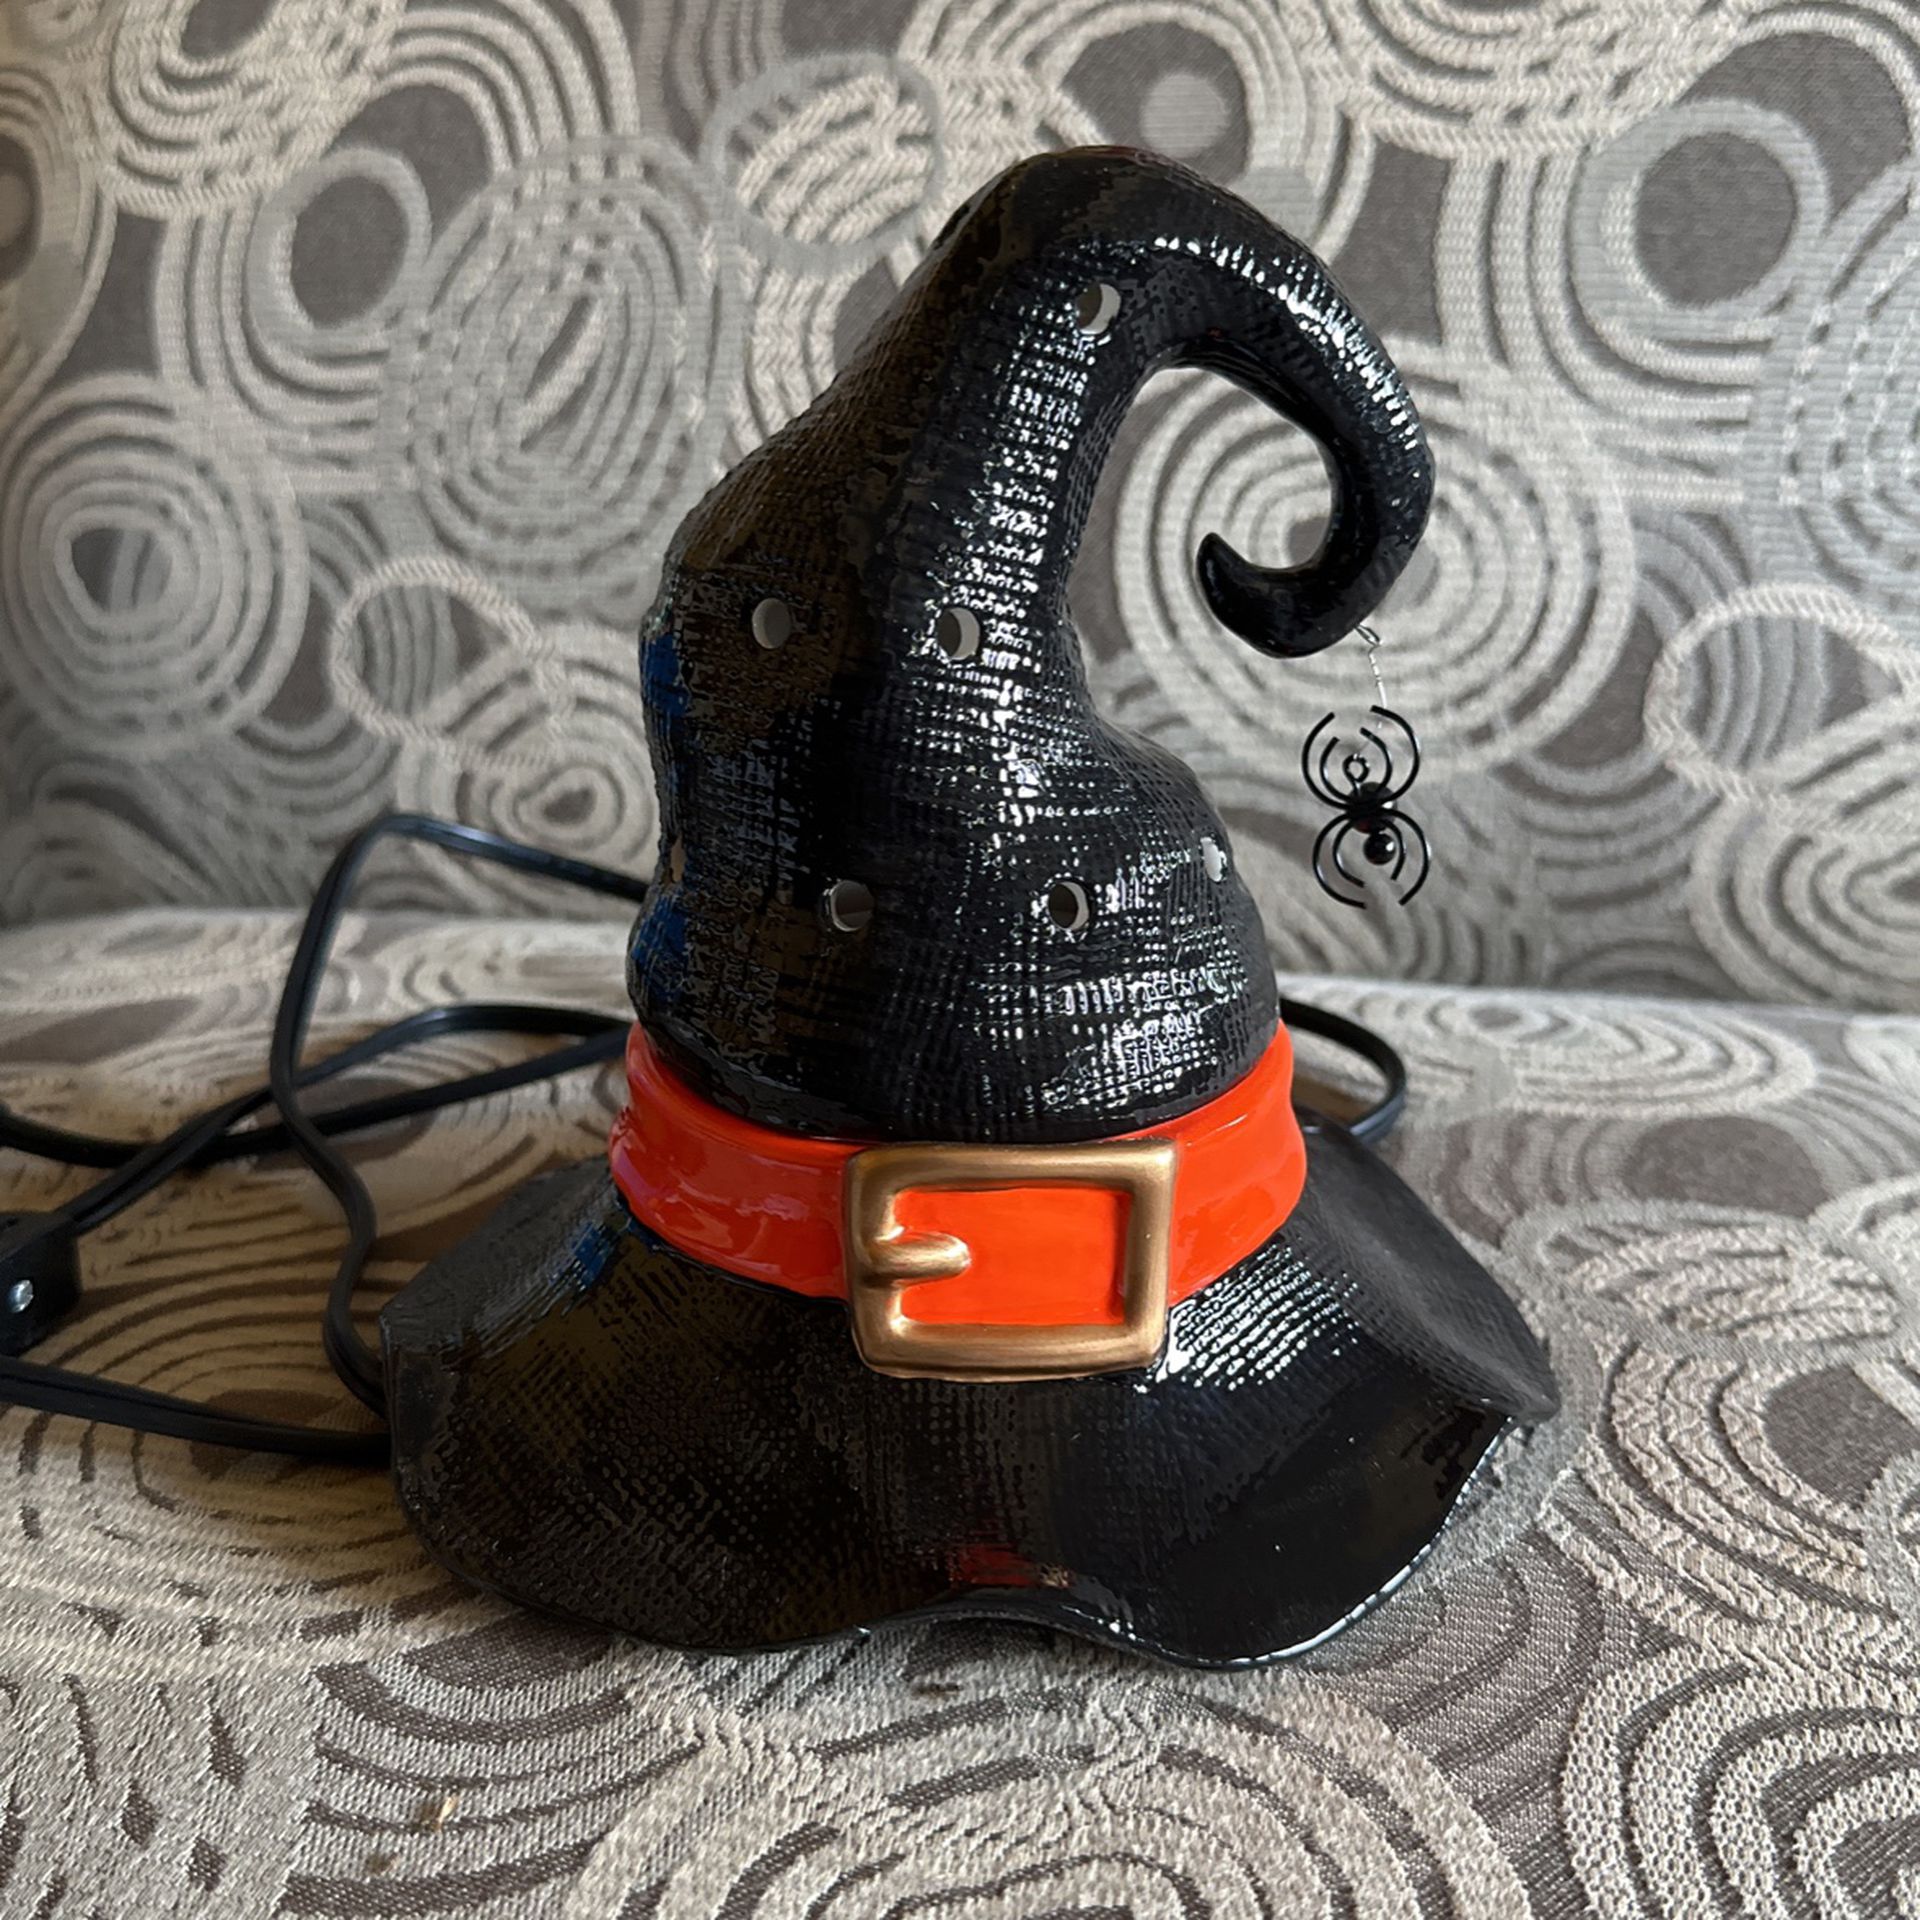 Scentsy “Salem” Witches Hat Warmer